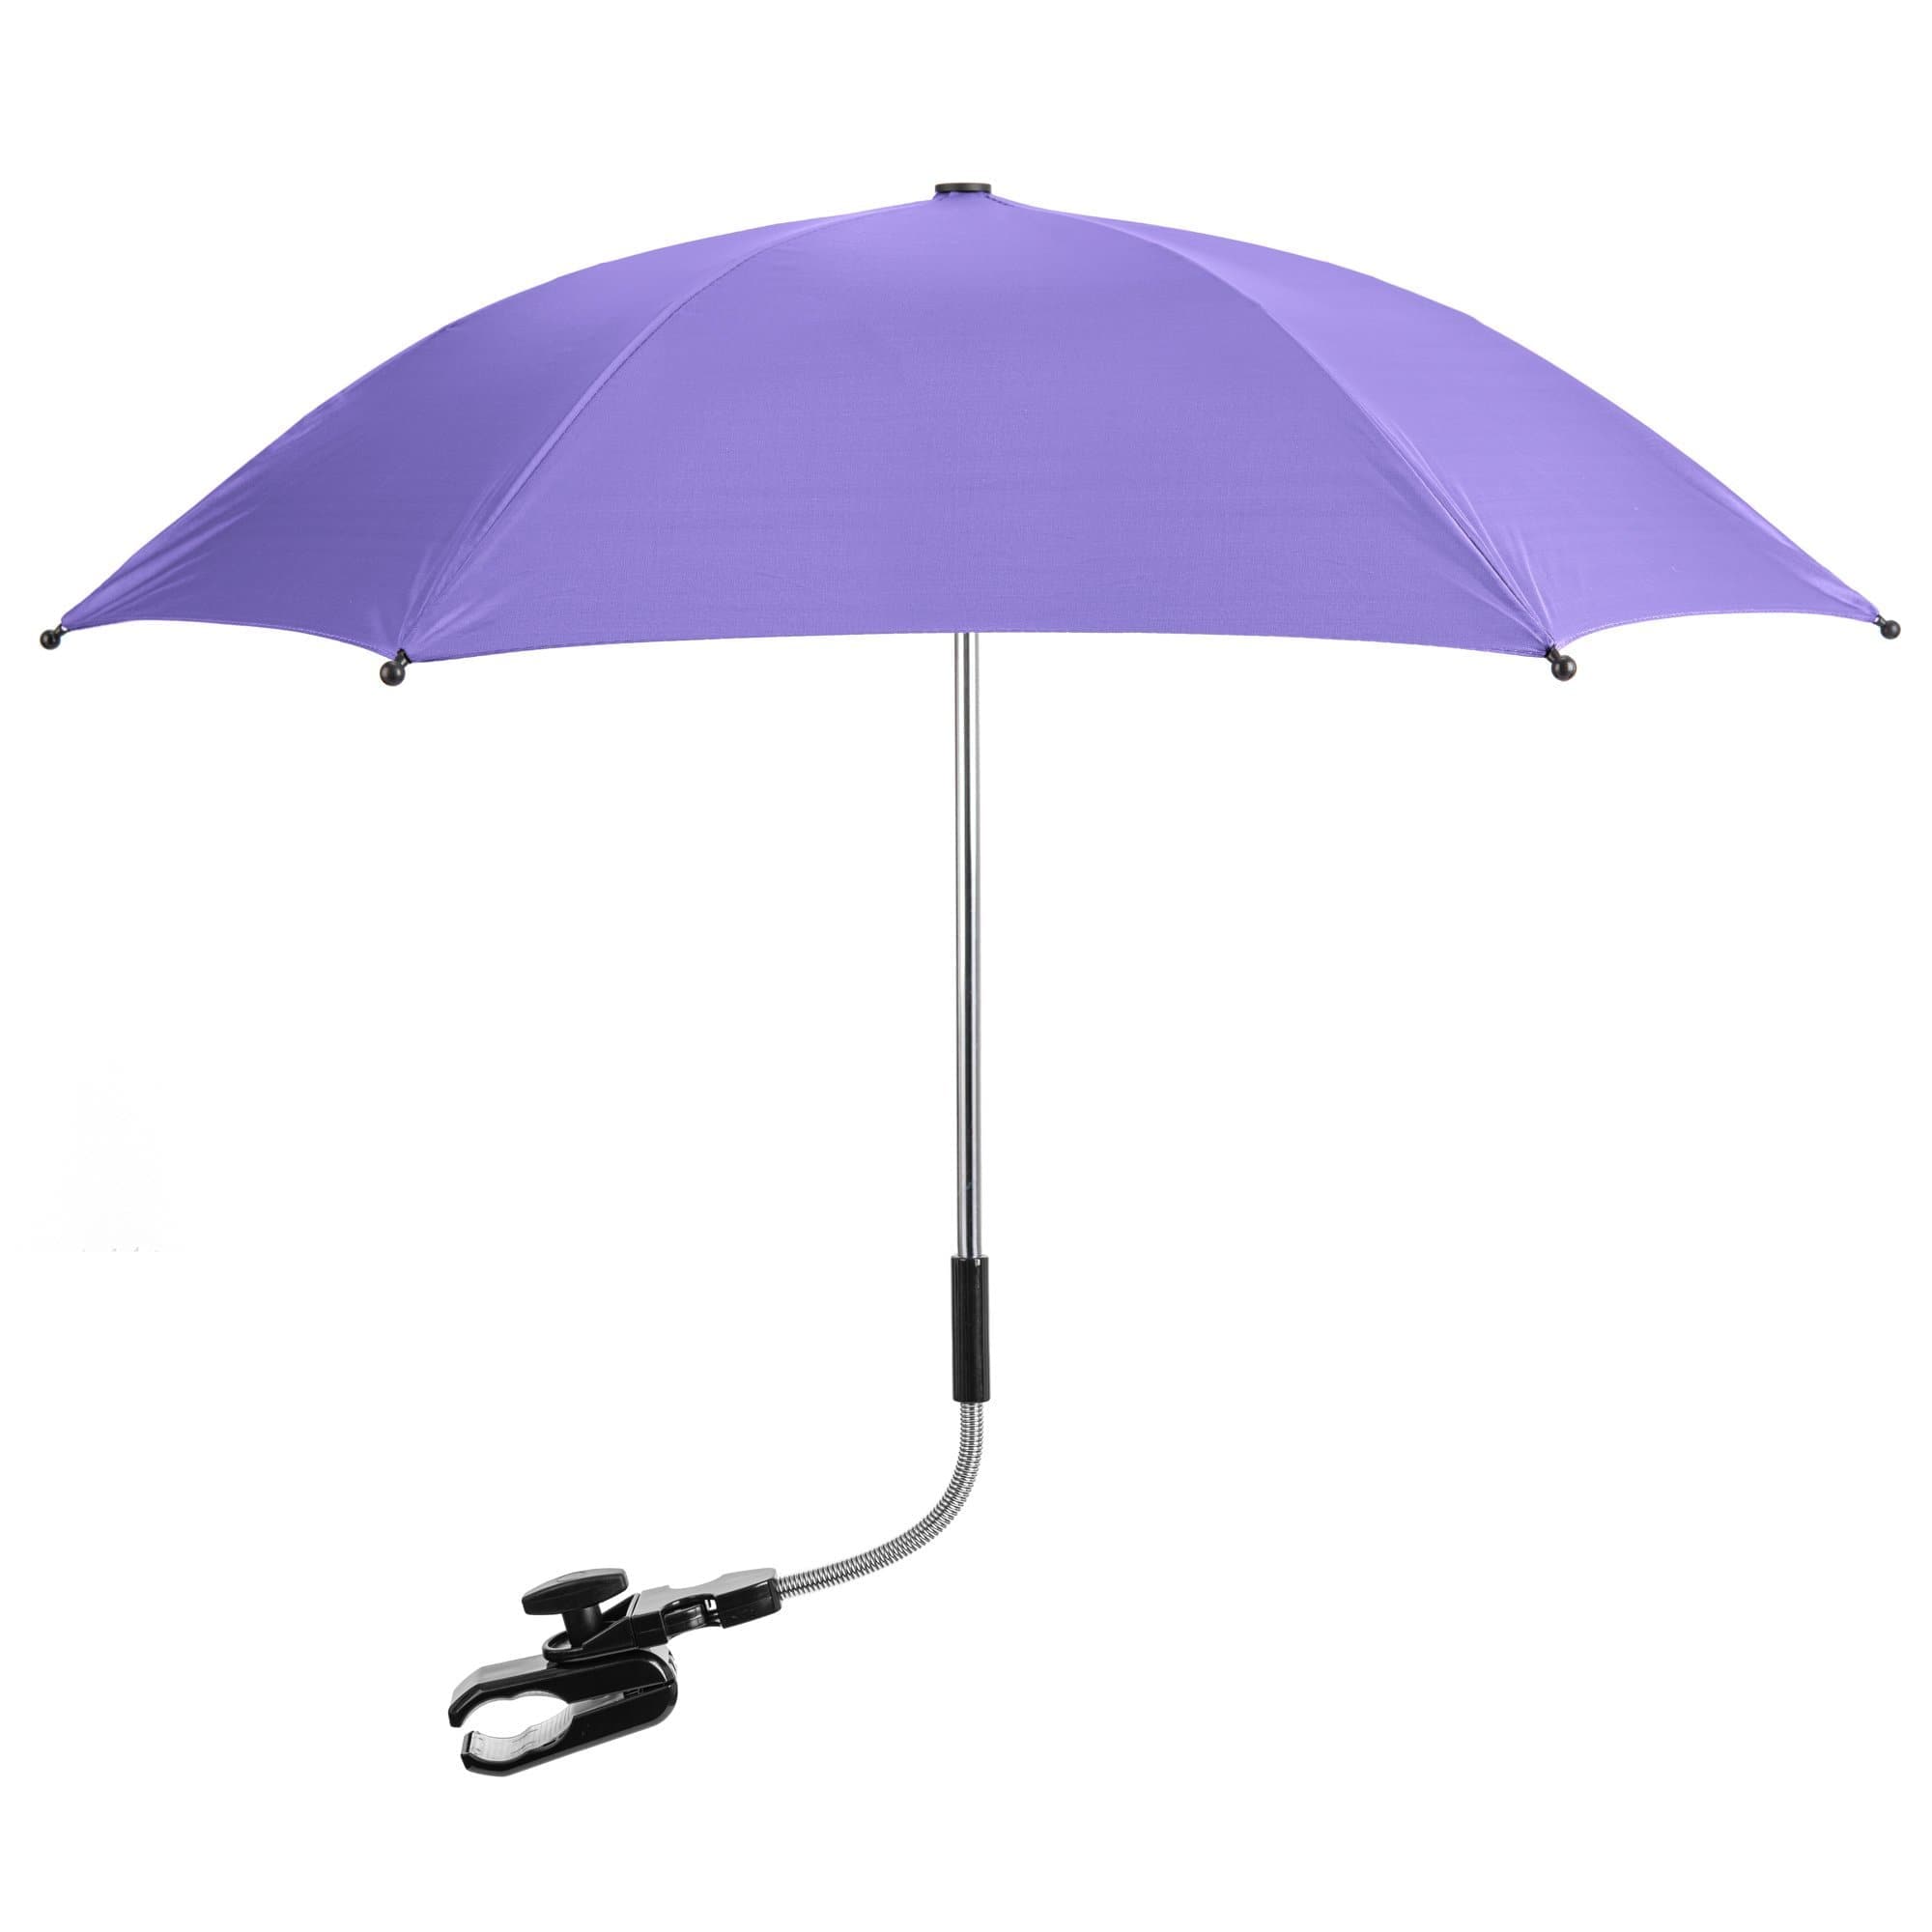 Baby Parasol Compatible With Baby Trend - Fits All Models - For Your Little One